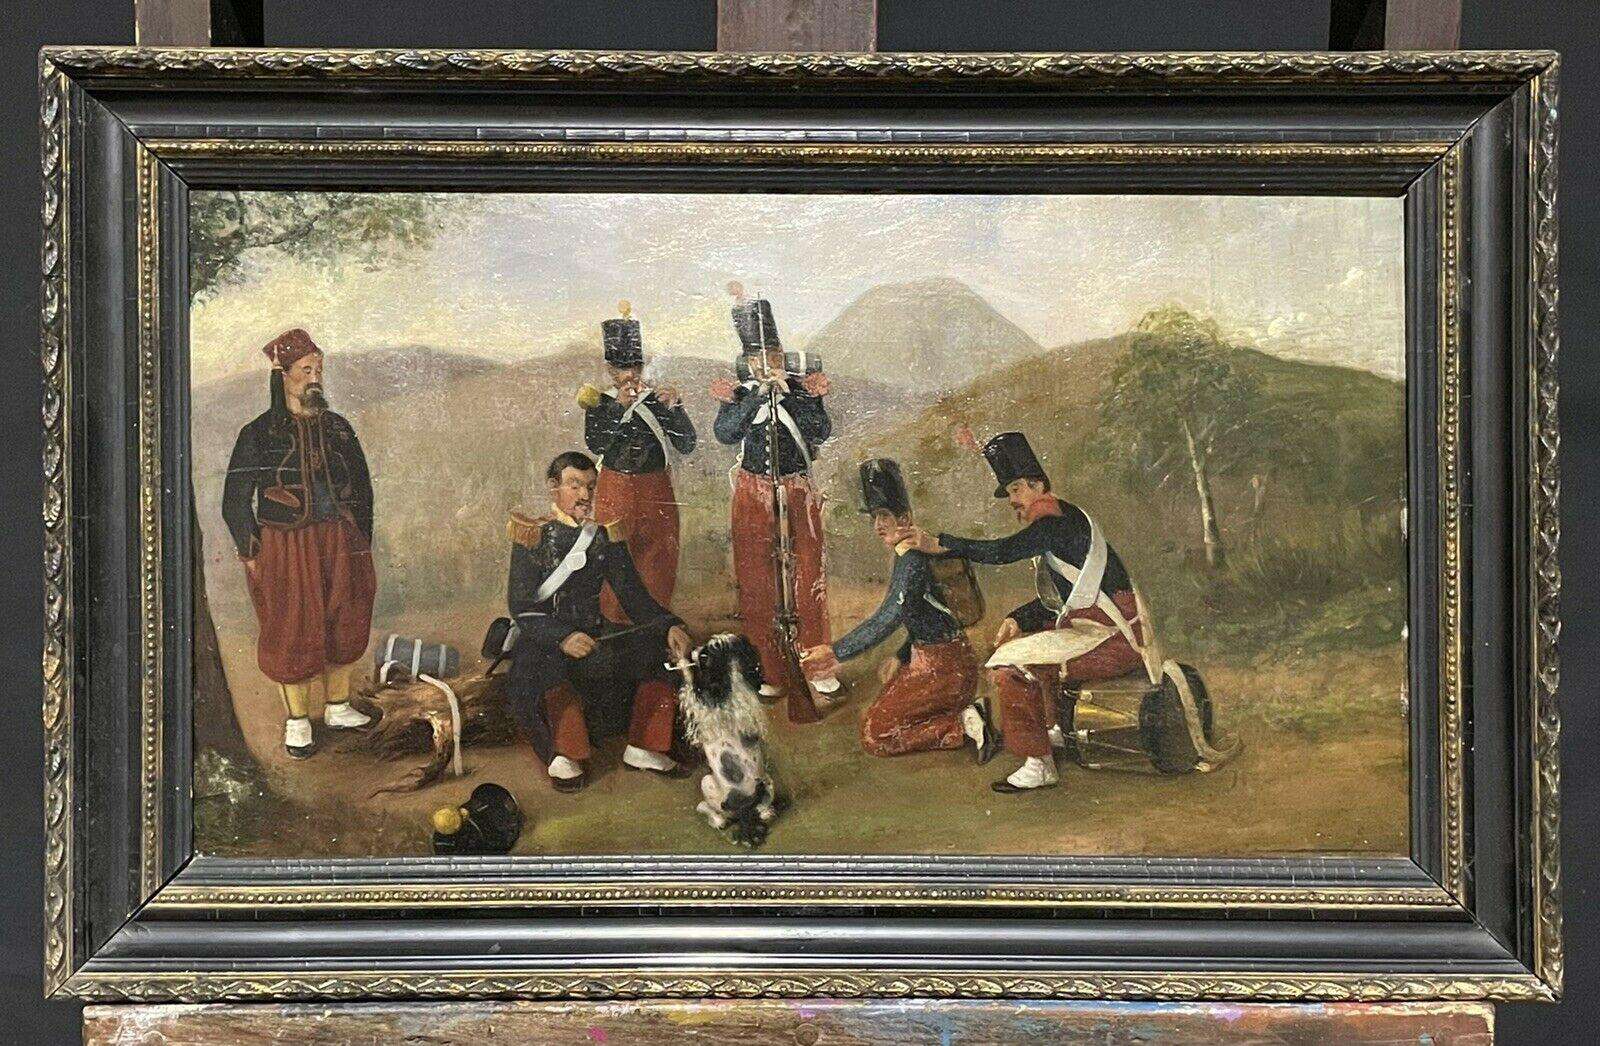 Unknown Landscape Painting - ANTIQUE FRENCH OIL PAINTING 19TH CENTURY SOLDIERS MAKING CAMP - MUSIC & DOG